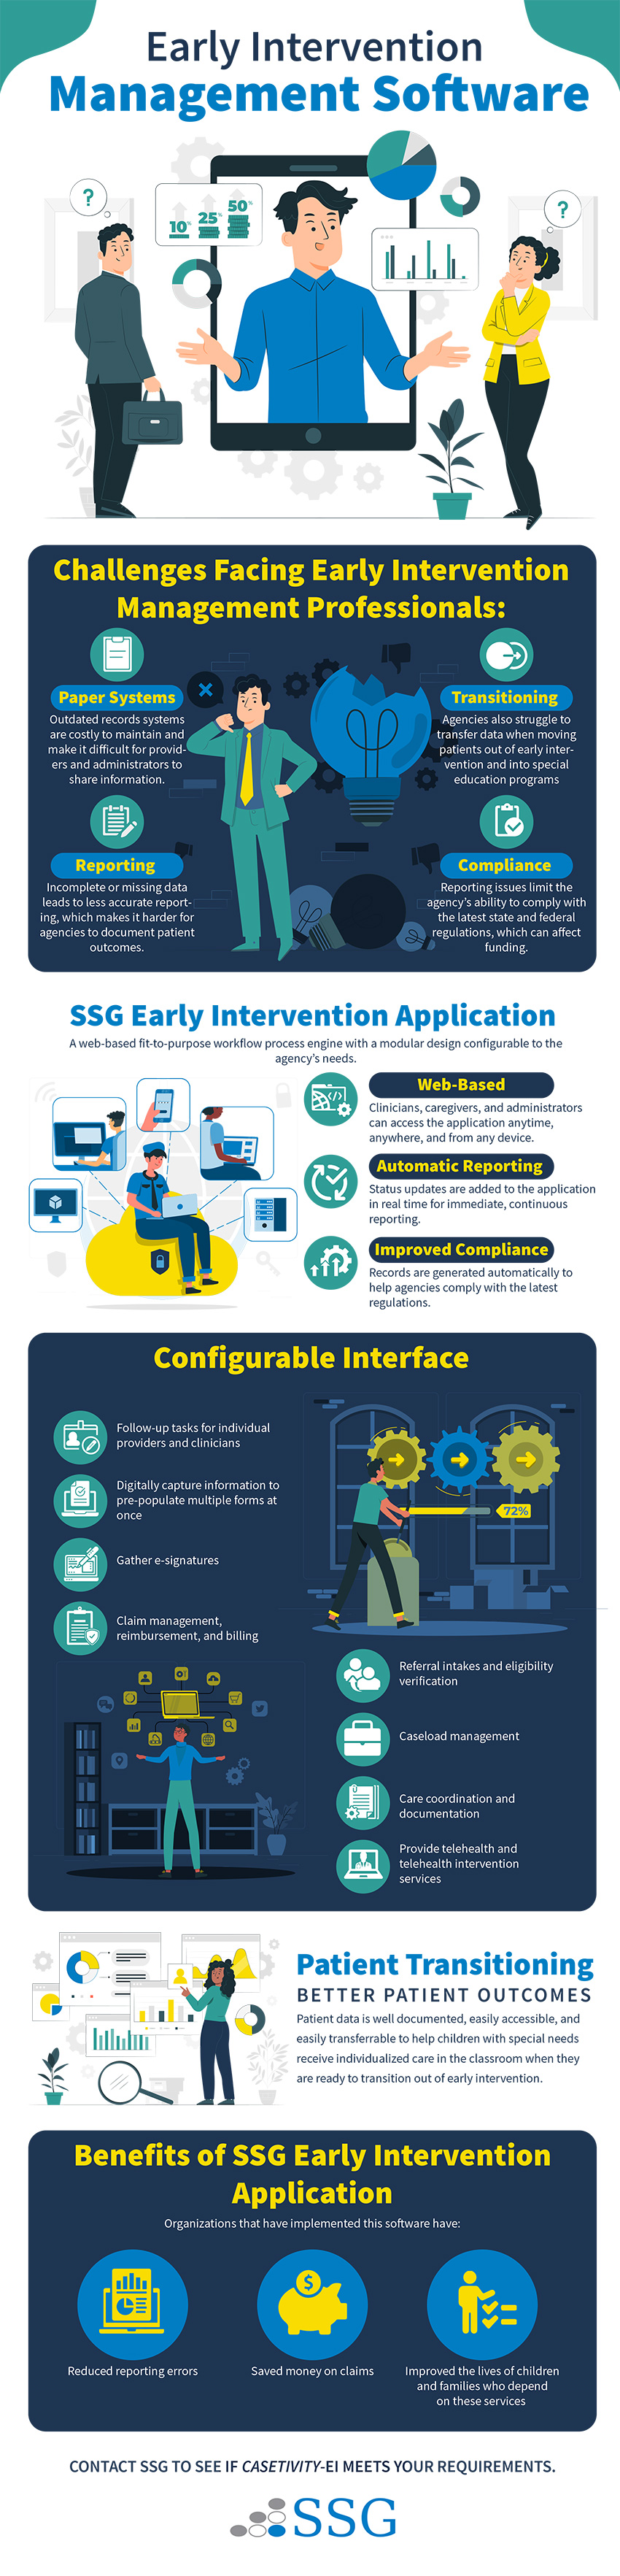 Early Intervention Management Software Infographic